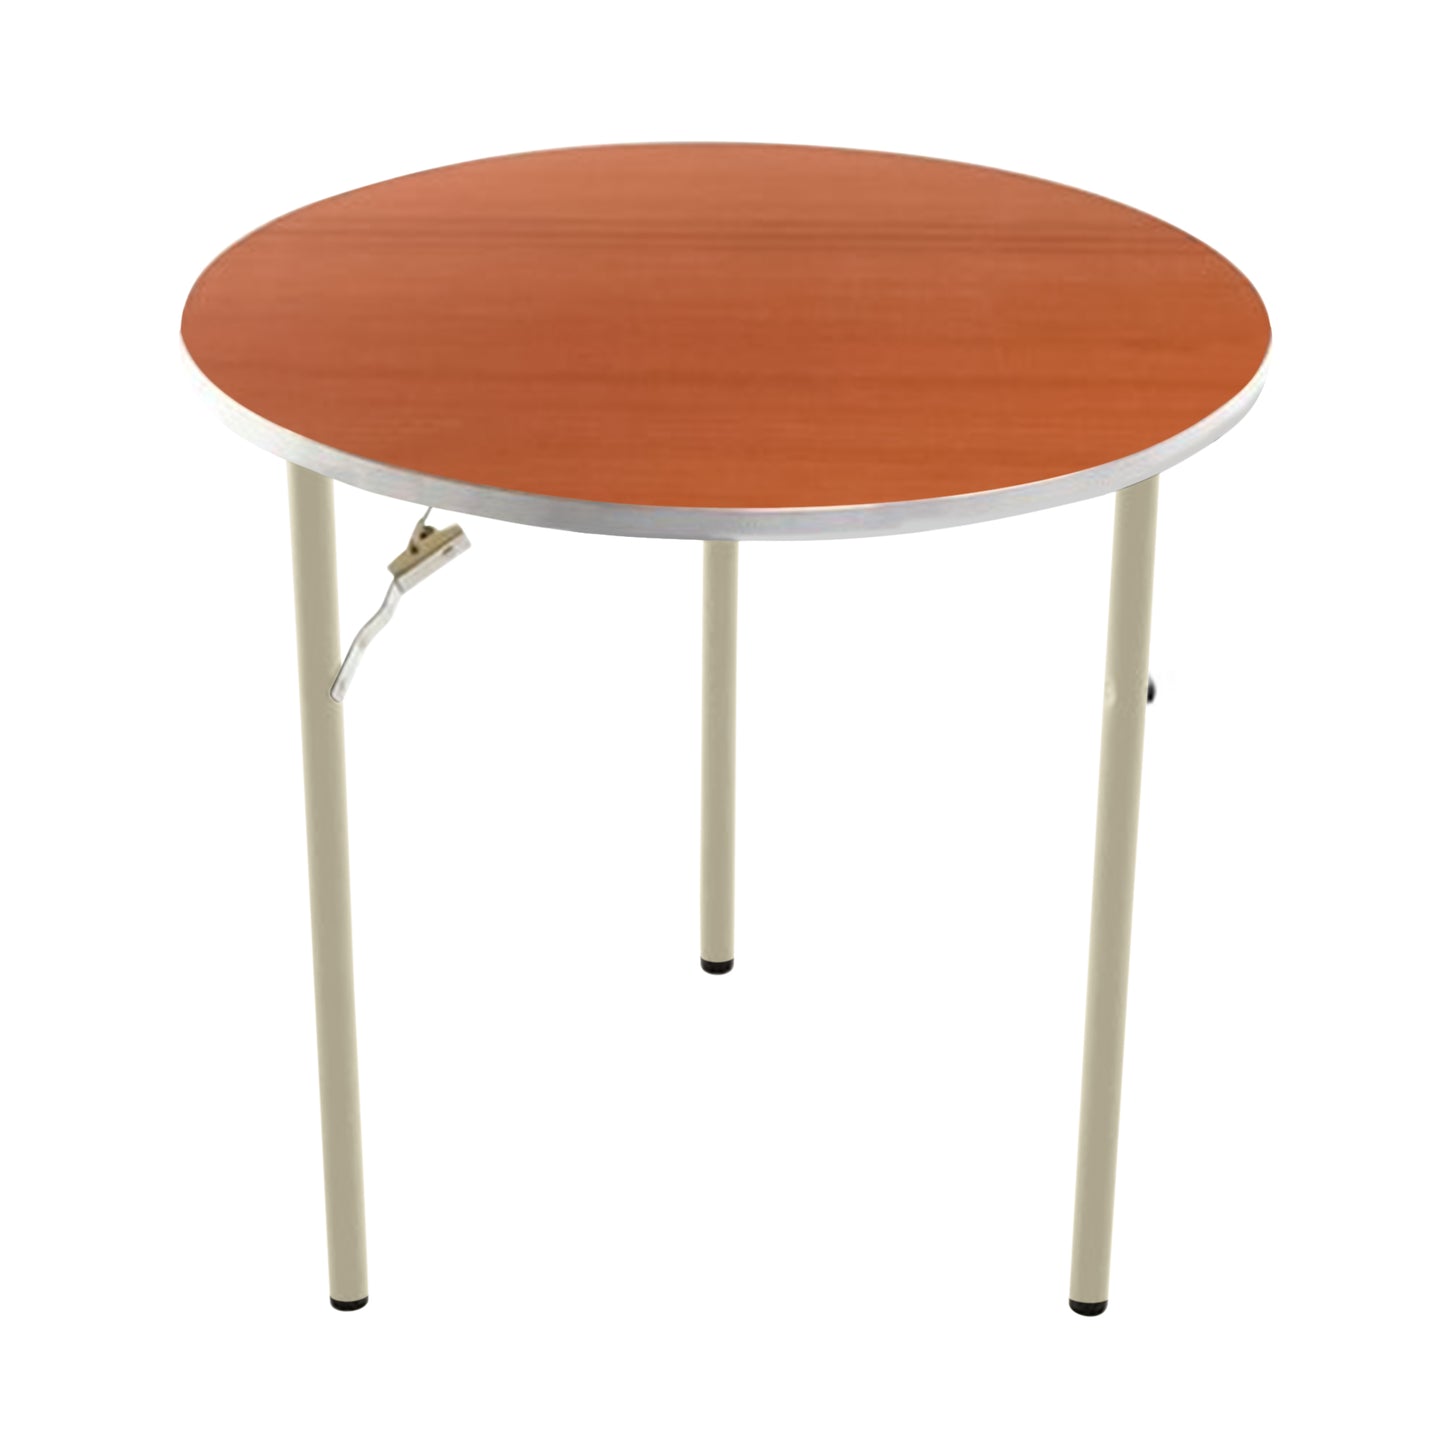 AmTab Folding Table - Plywood Stained and Sealed - Aluminum Edge - Round - 36" Diameter x 29"H  (AmTab AMT-R36PA)